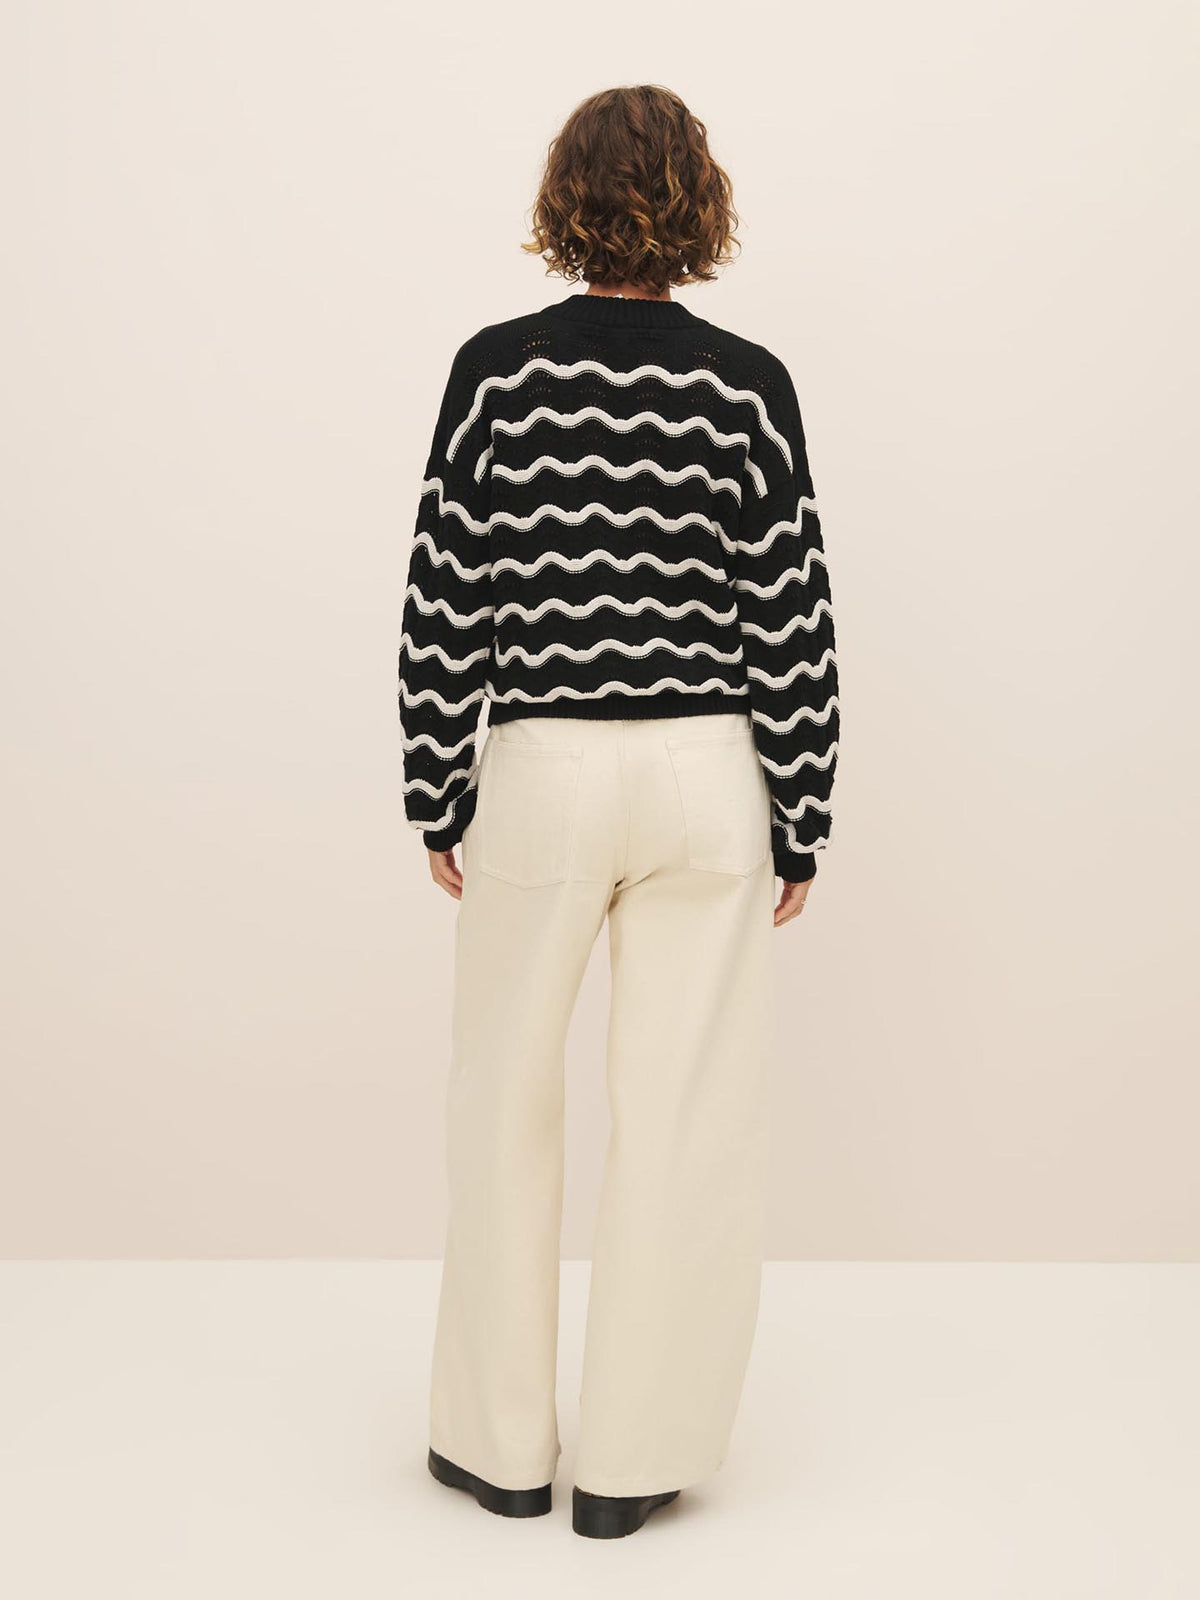 Person standing with their back to the camera wearing a Kowtow Tide Jumper made from Fairtrade organic cotton and beige pants.